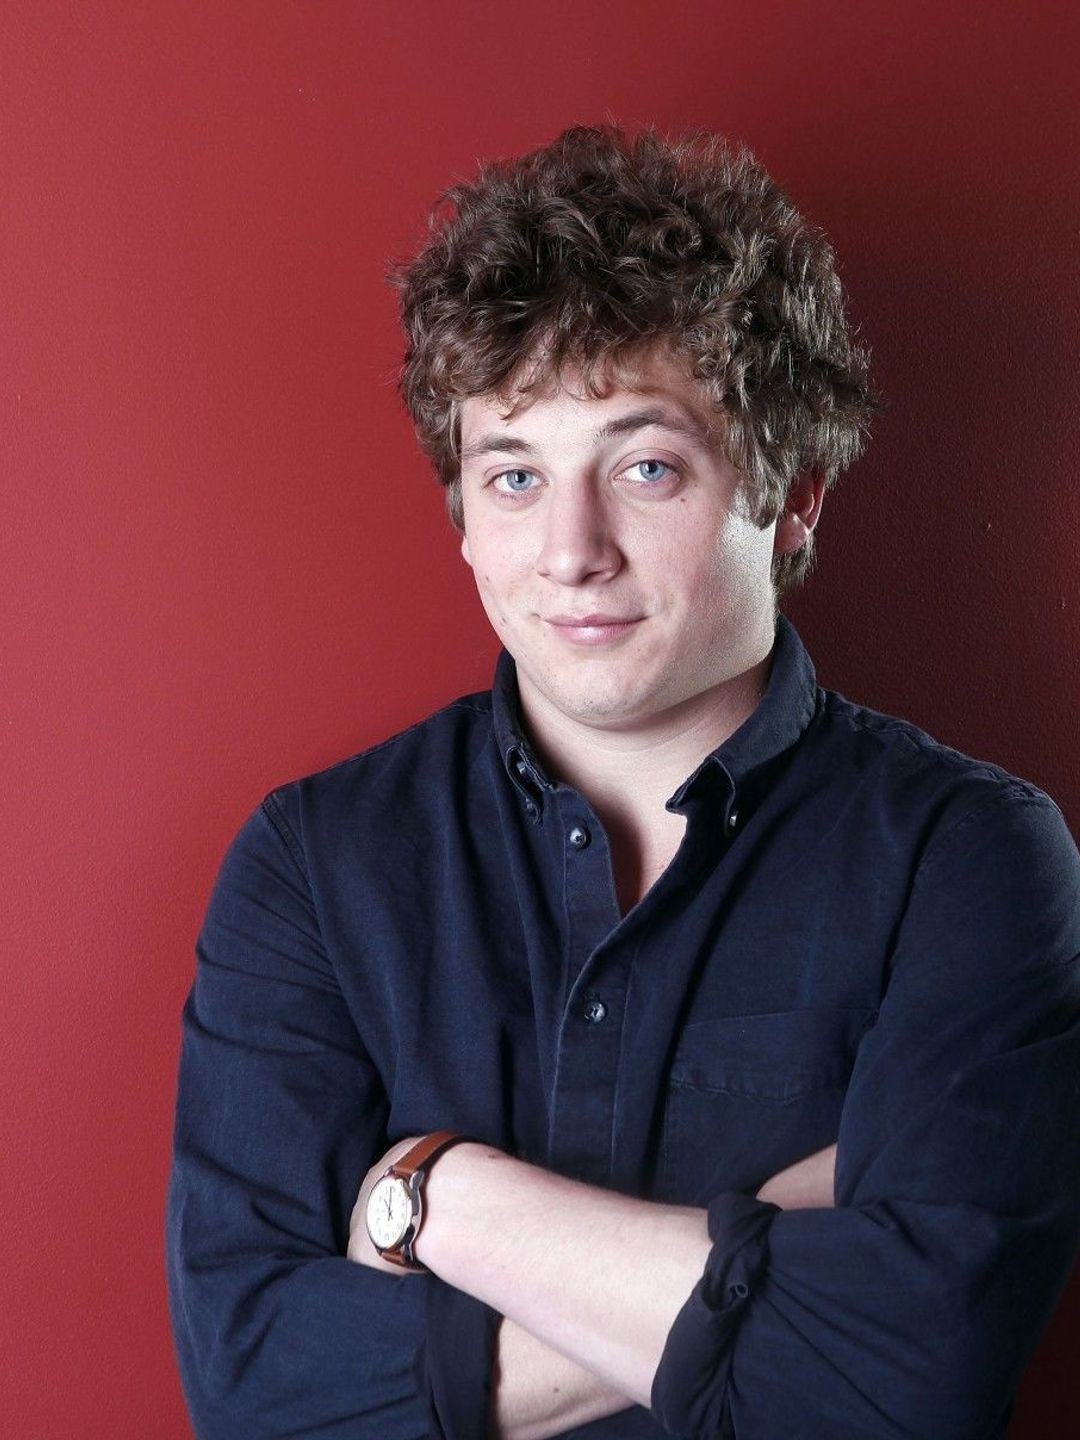 Jeremy Allen White who is his mother